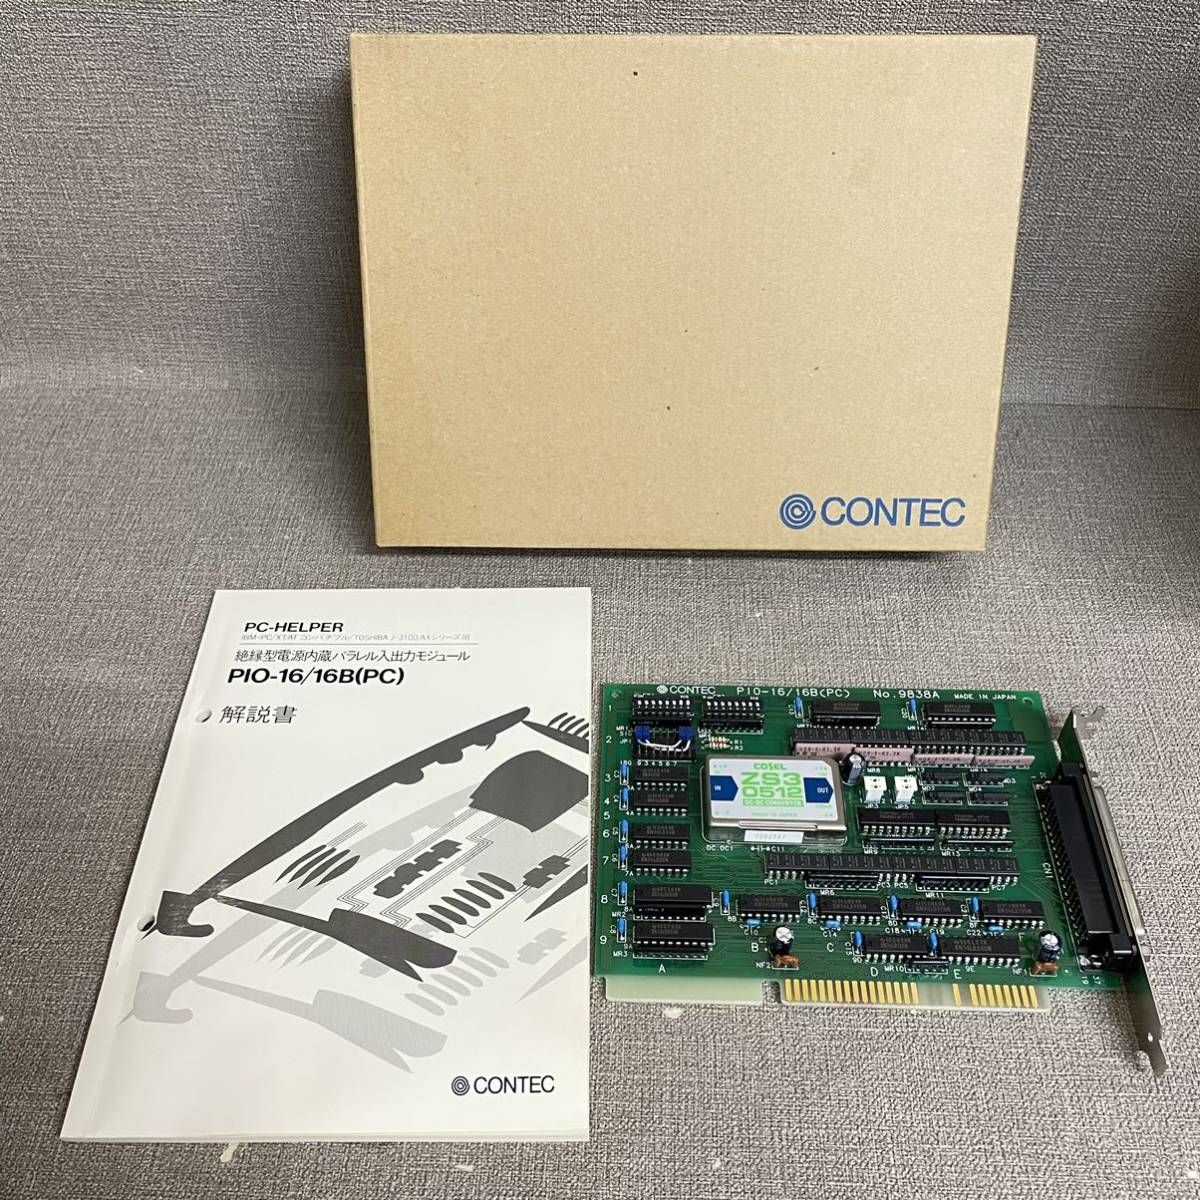 A6）美品　Contec 9838A インターフェースボード P10-16/16B (PC)//COSEL ZS3 0512搭載（21）